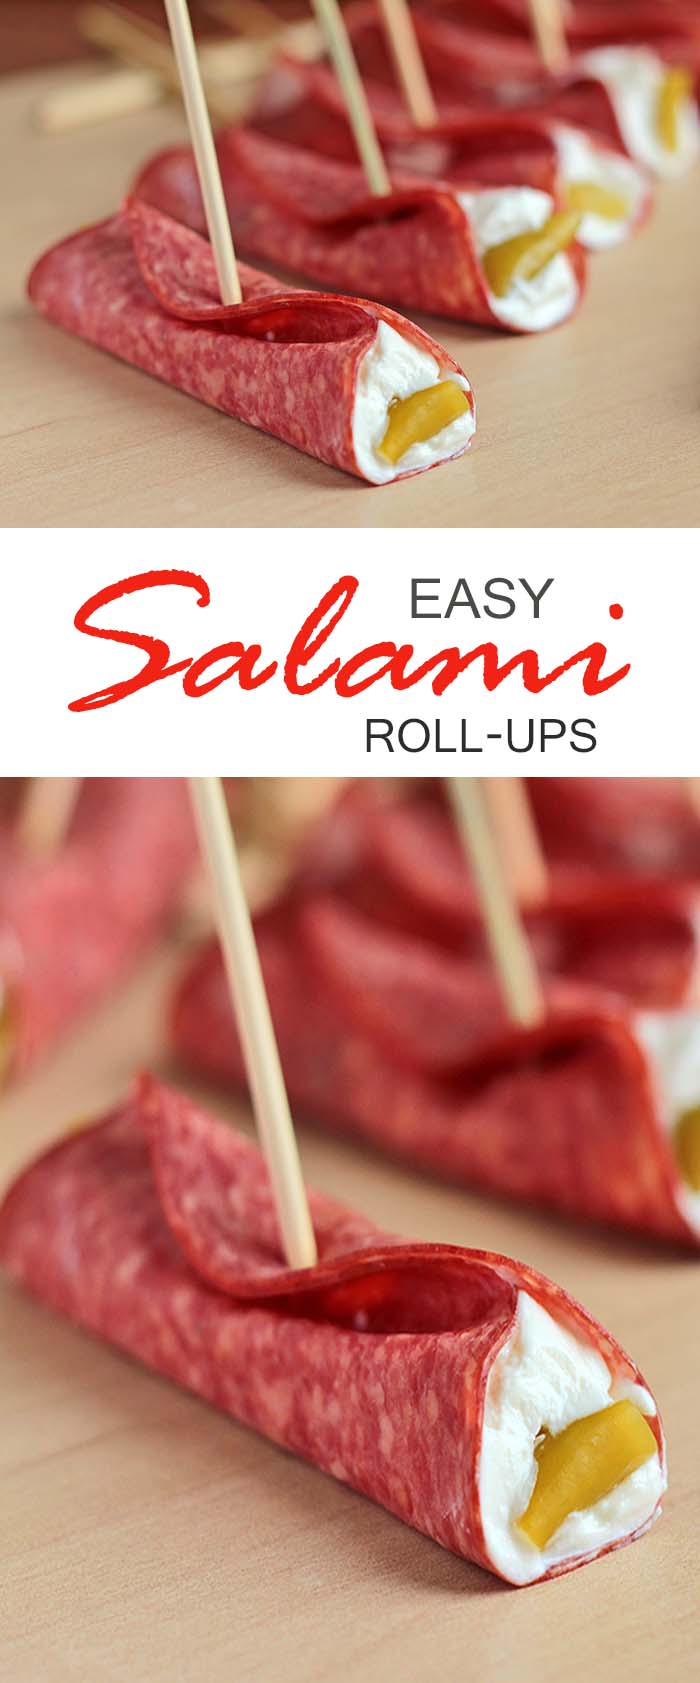 Looking to host a great Sunday football or the Super Bowl party? Try this easy recipe to satisfy their hunger between quarters. #appetizer #salami #superbowl